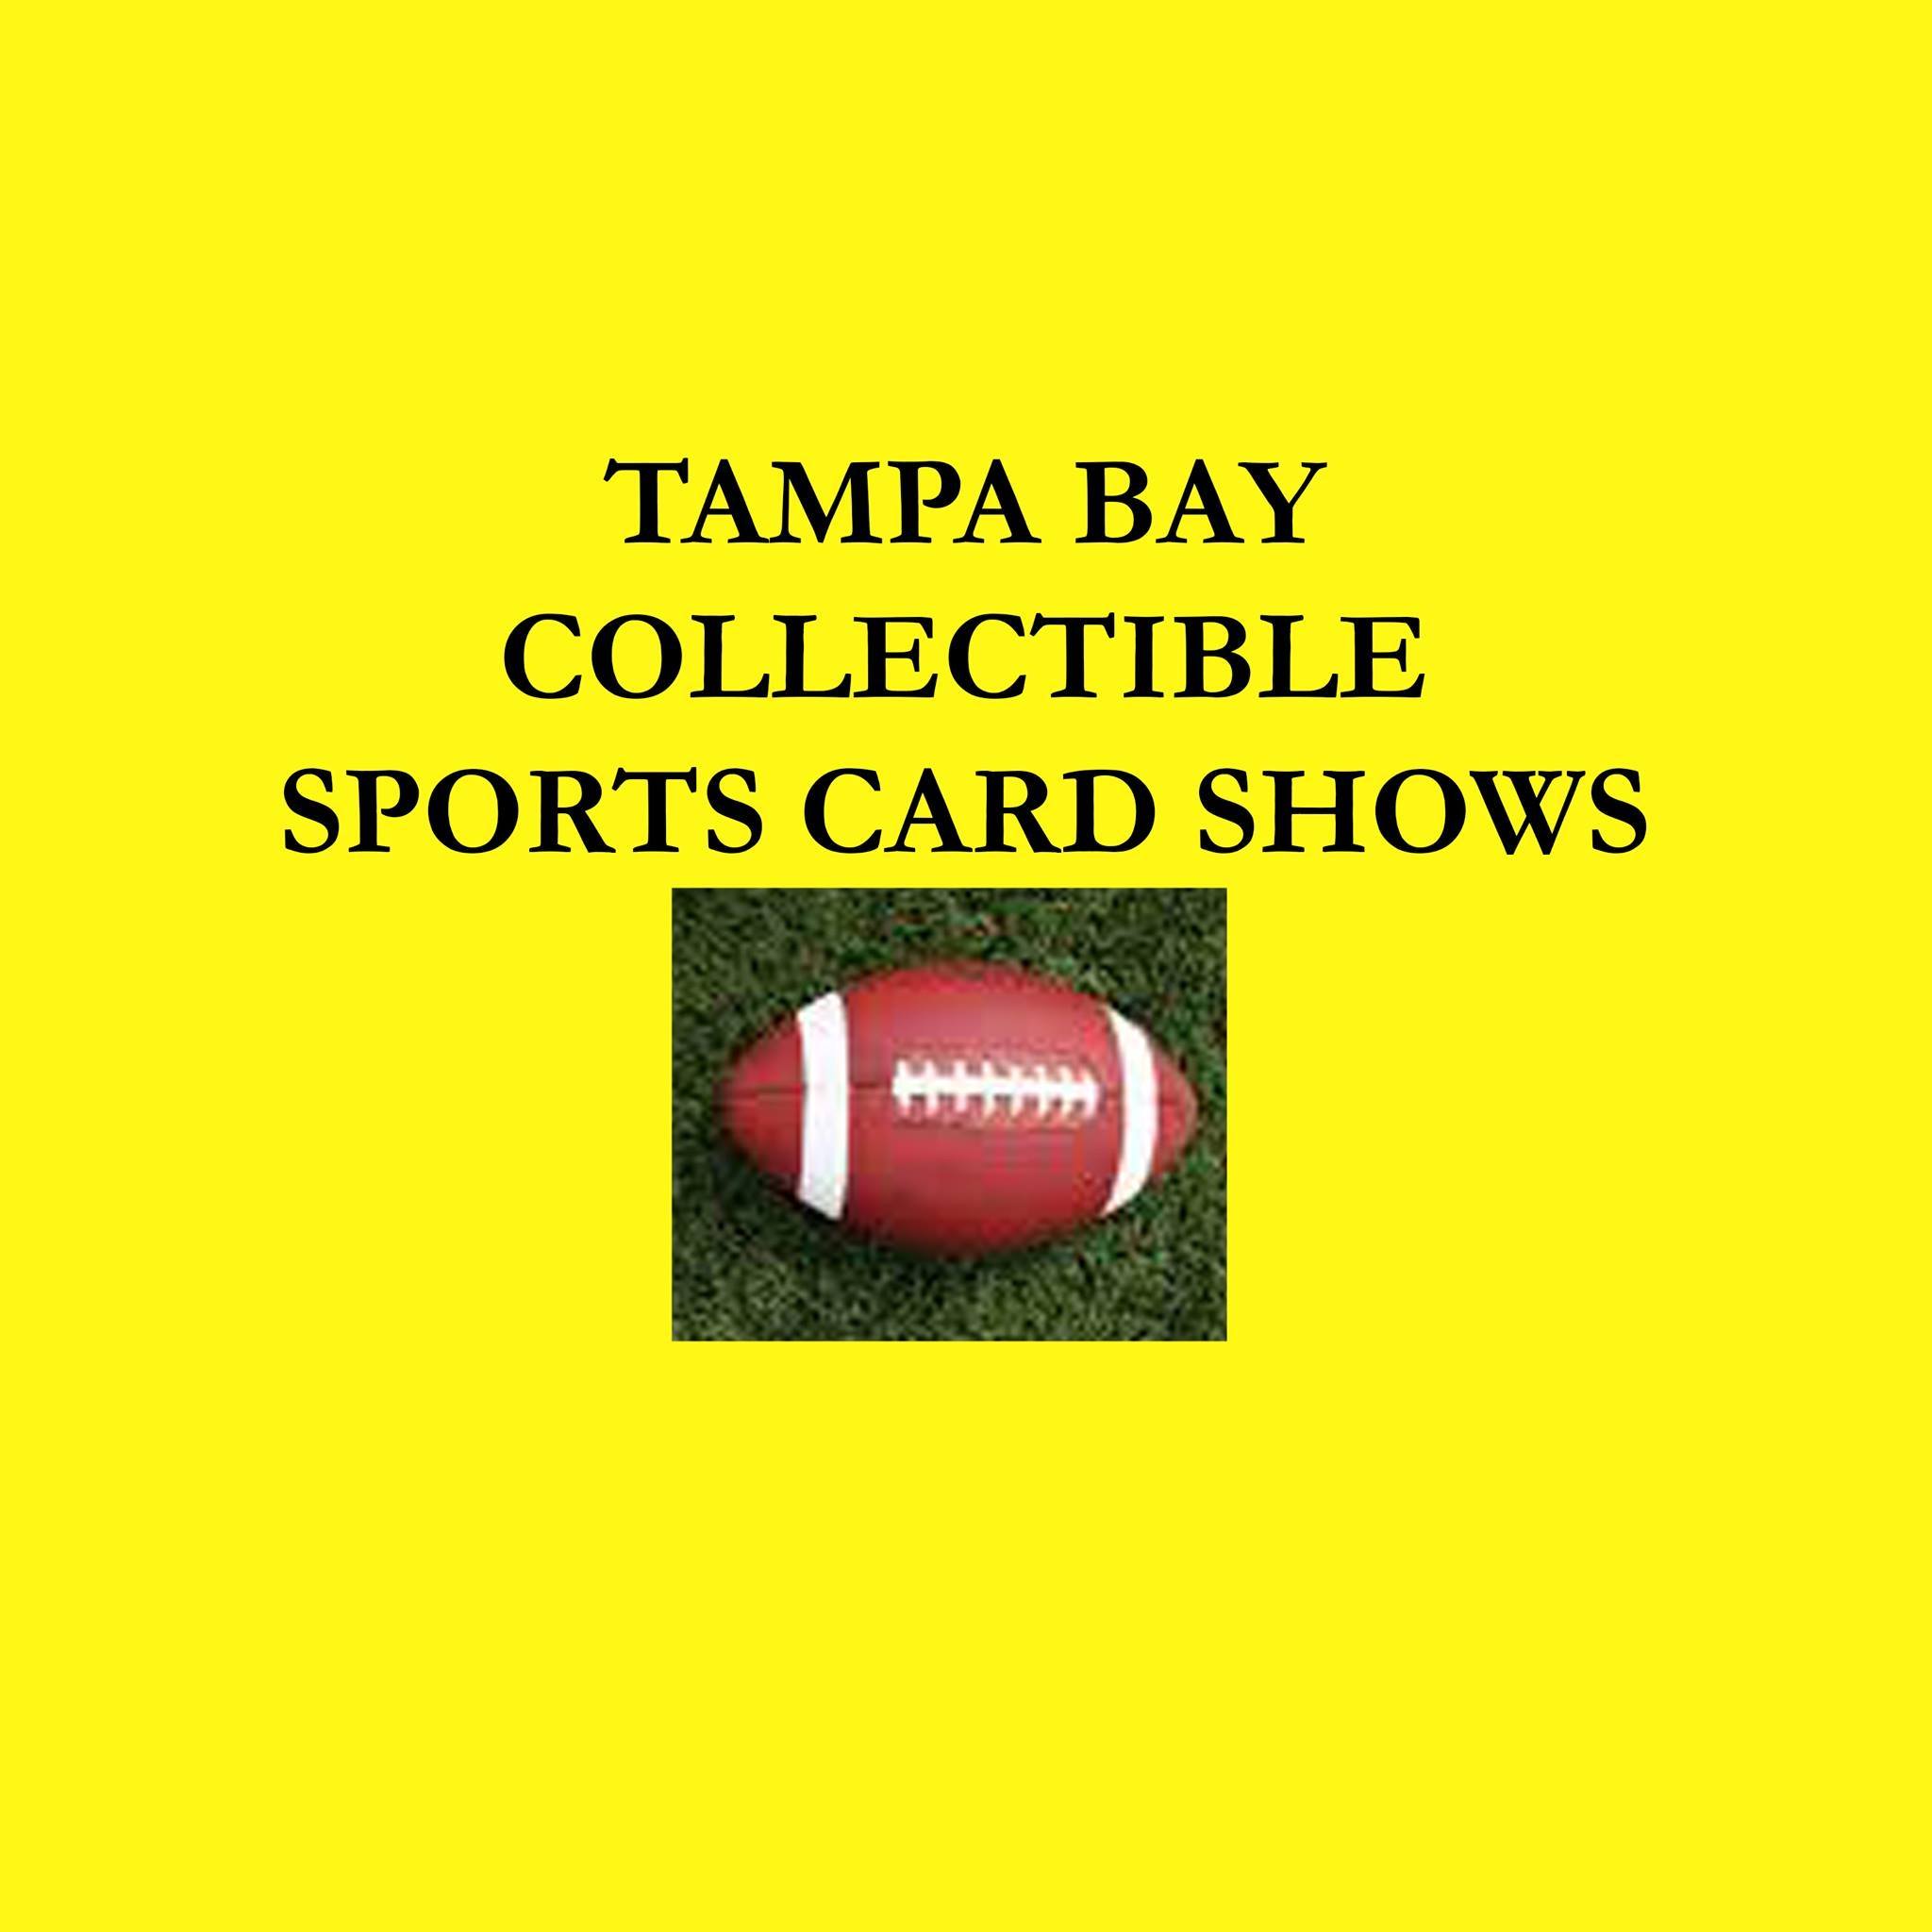 Tampa Bay Collectible Sports Card Show - Tampa